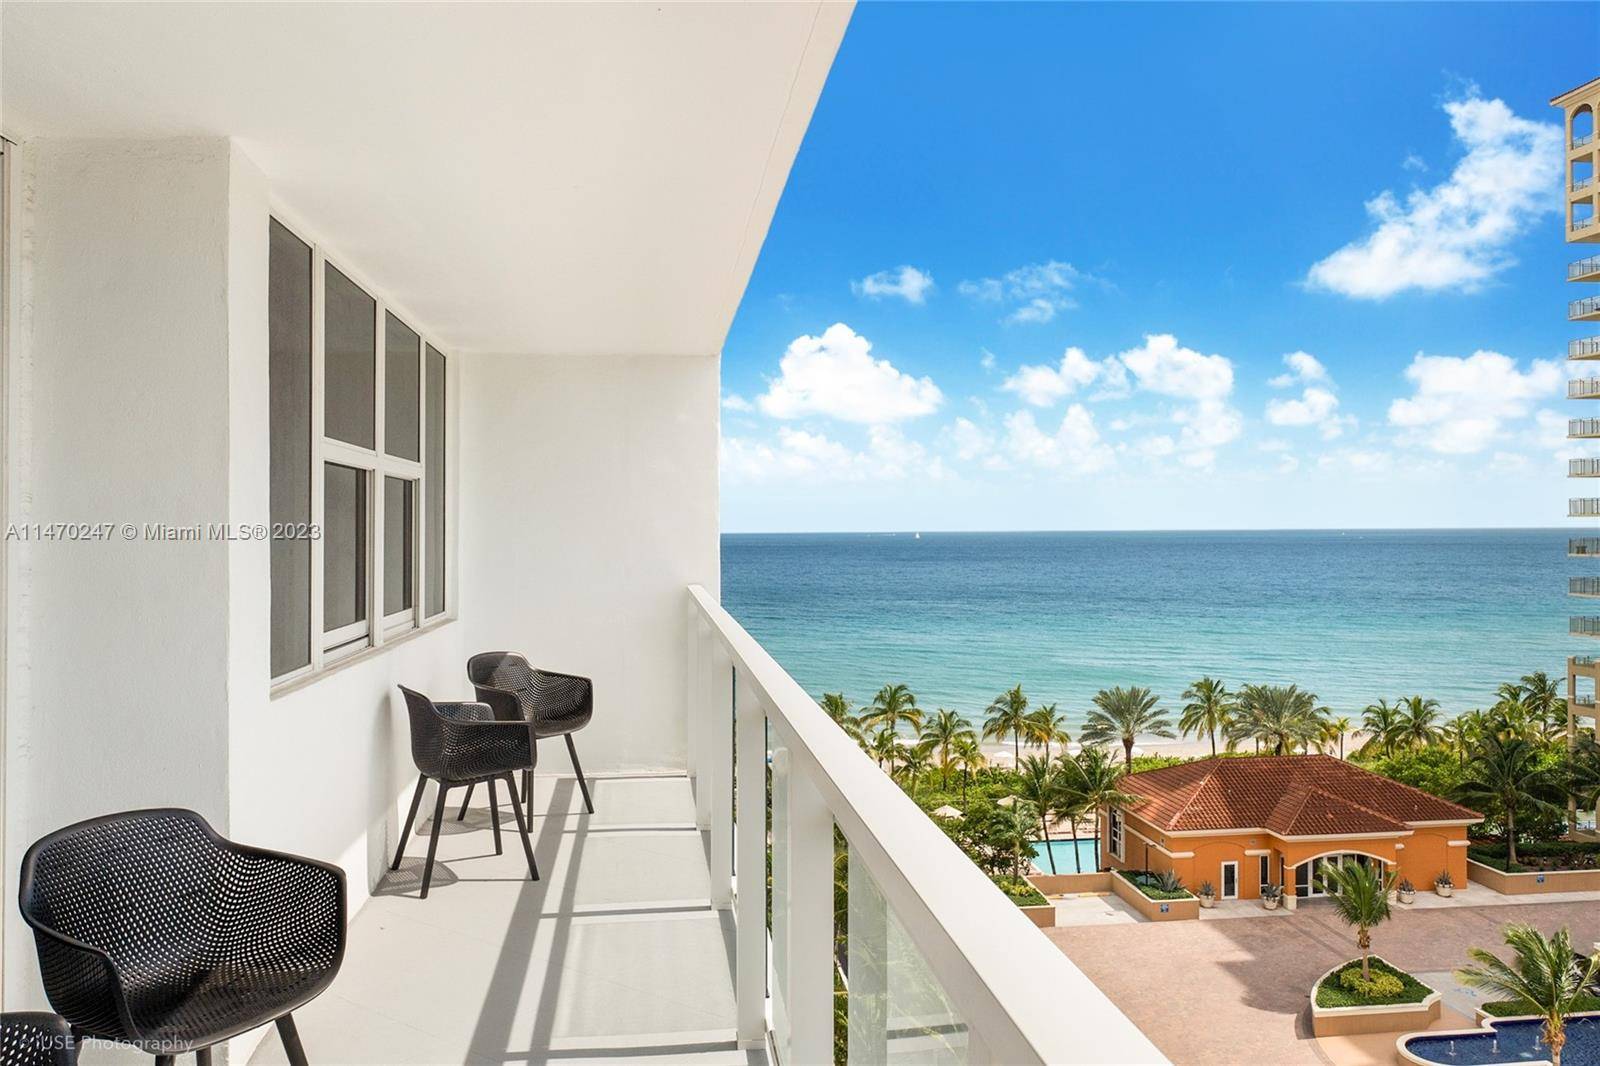 Just steps from the sand, oceanfront Location, Hallandale Beach, FL, Parker Plaza Condominium Unit 810 Best South Line Enjoy your coffee looking at the ocean and city views from your ...